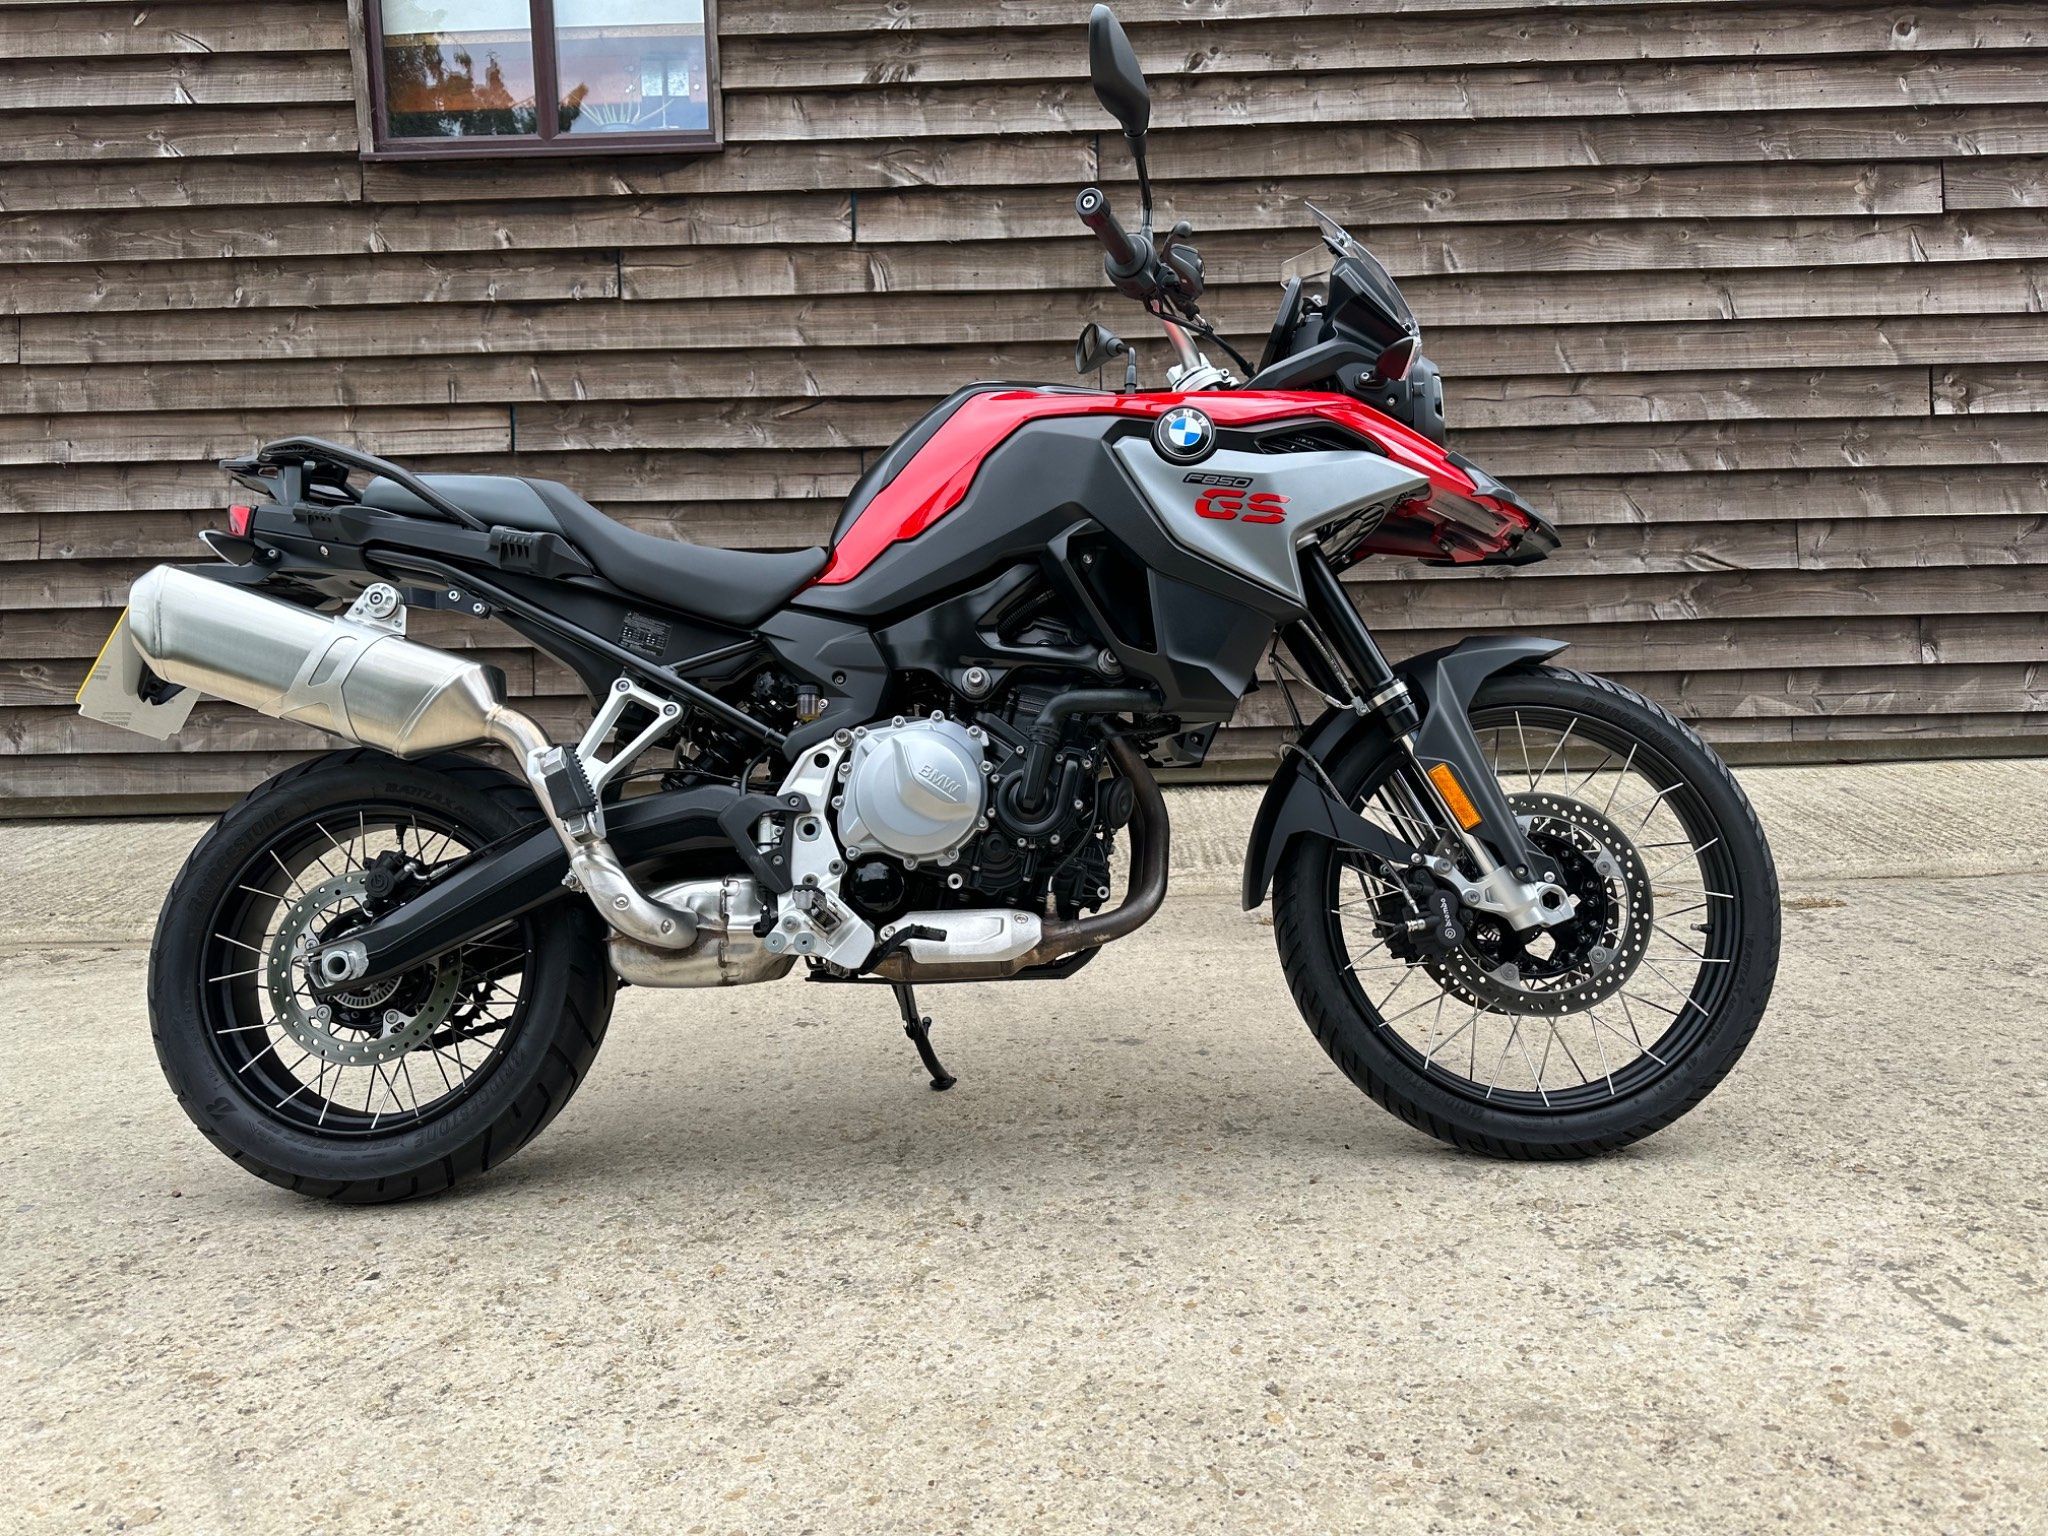 2020 BMW F850GS 850 GS Sport ABS From £104.57 per month 